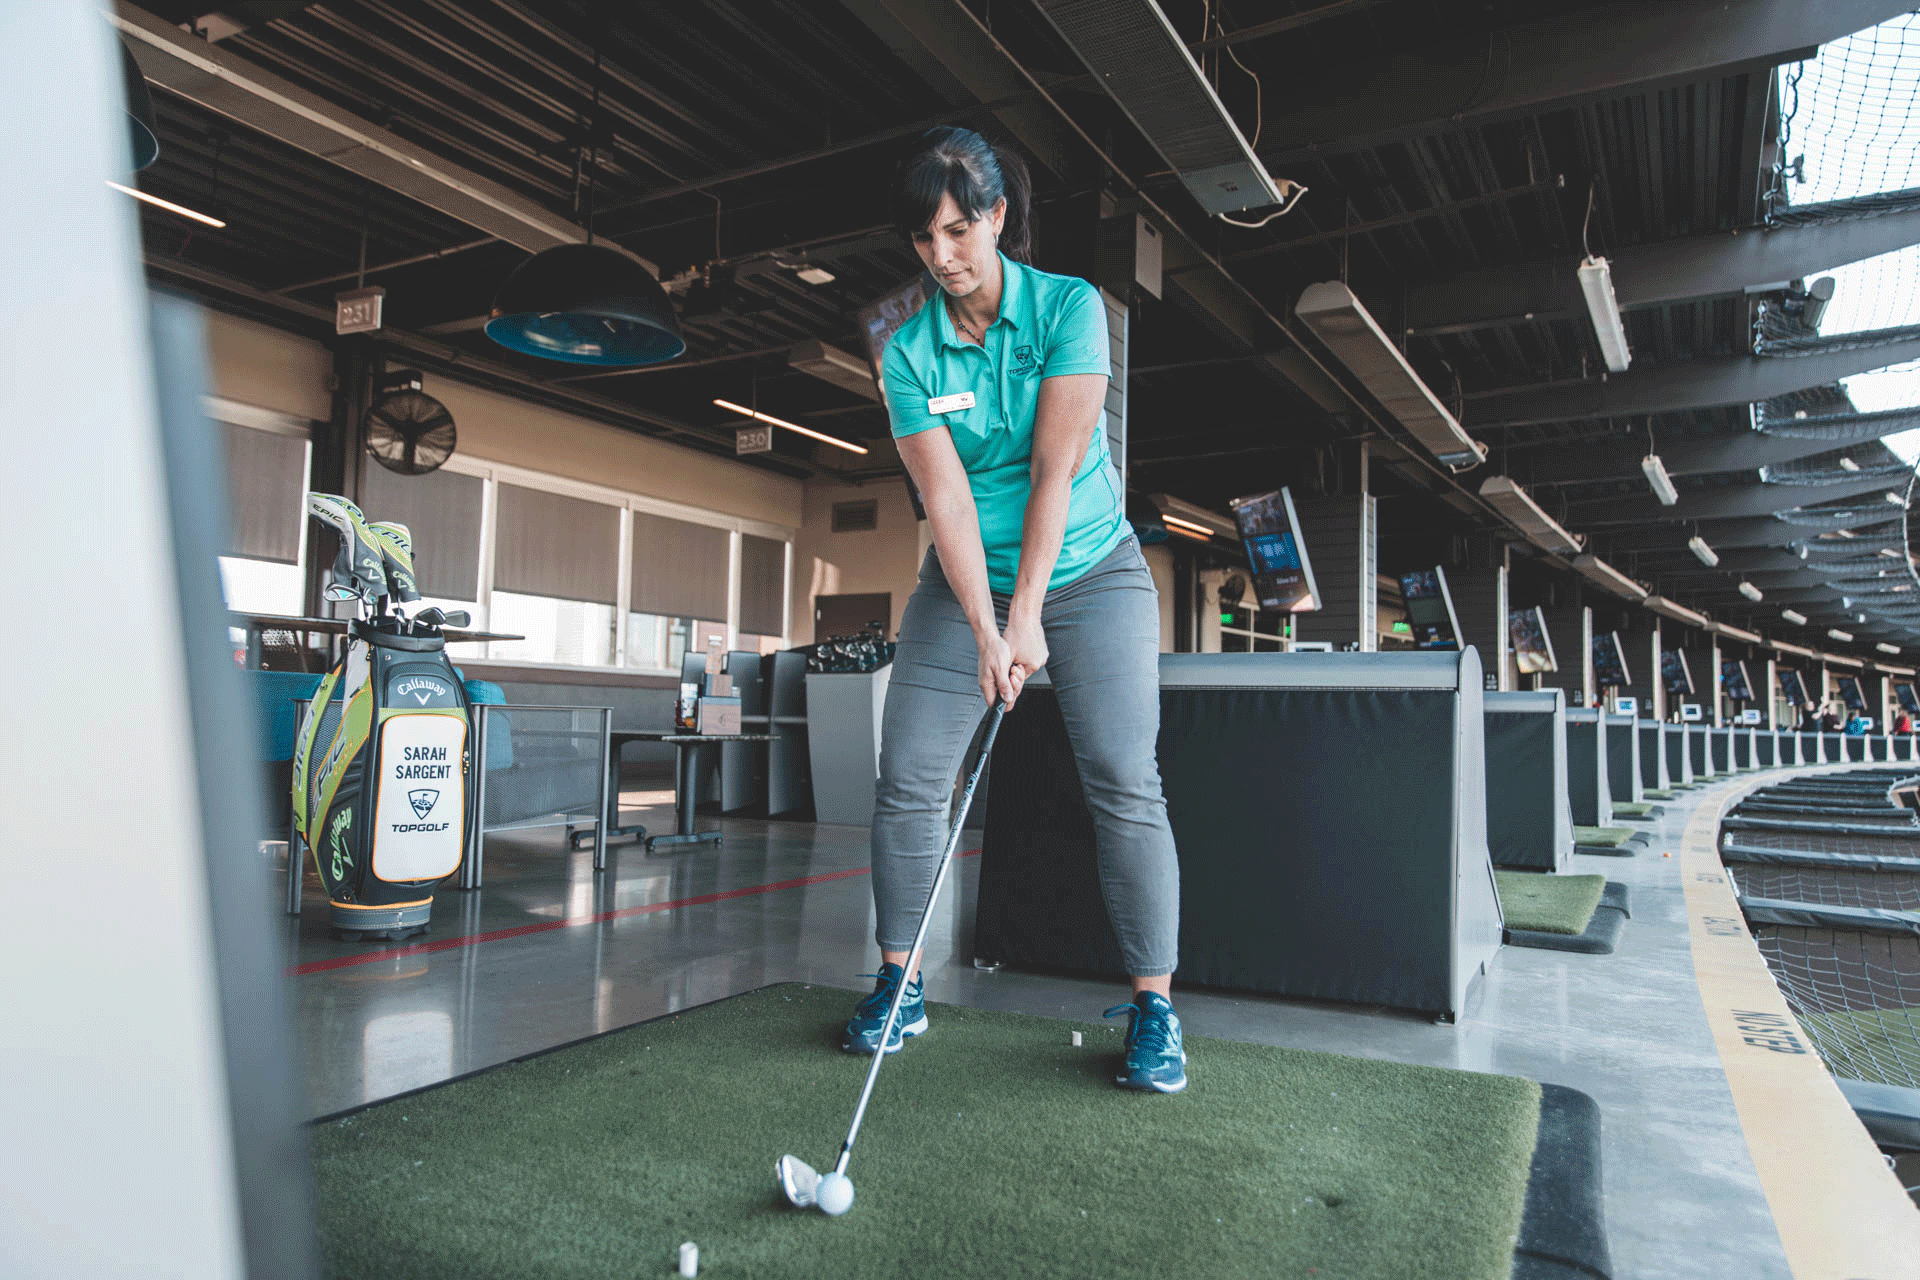 Top Golf Enhance your golf skills with lessons from Topgolf Birmingham golf pro Sarah Sargent. $30 off first lesson!